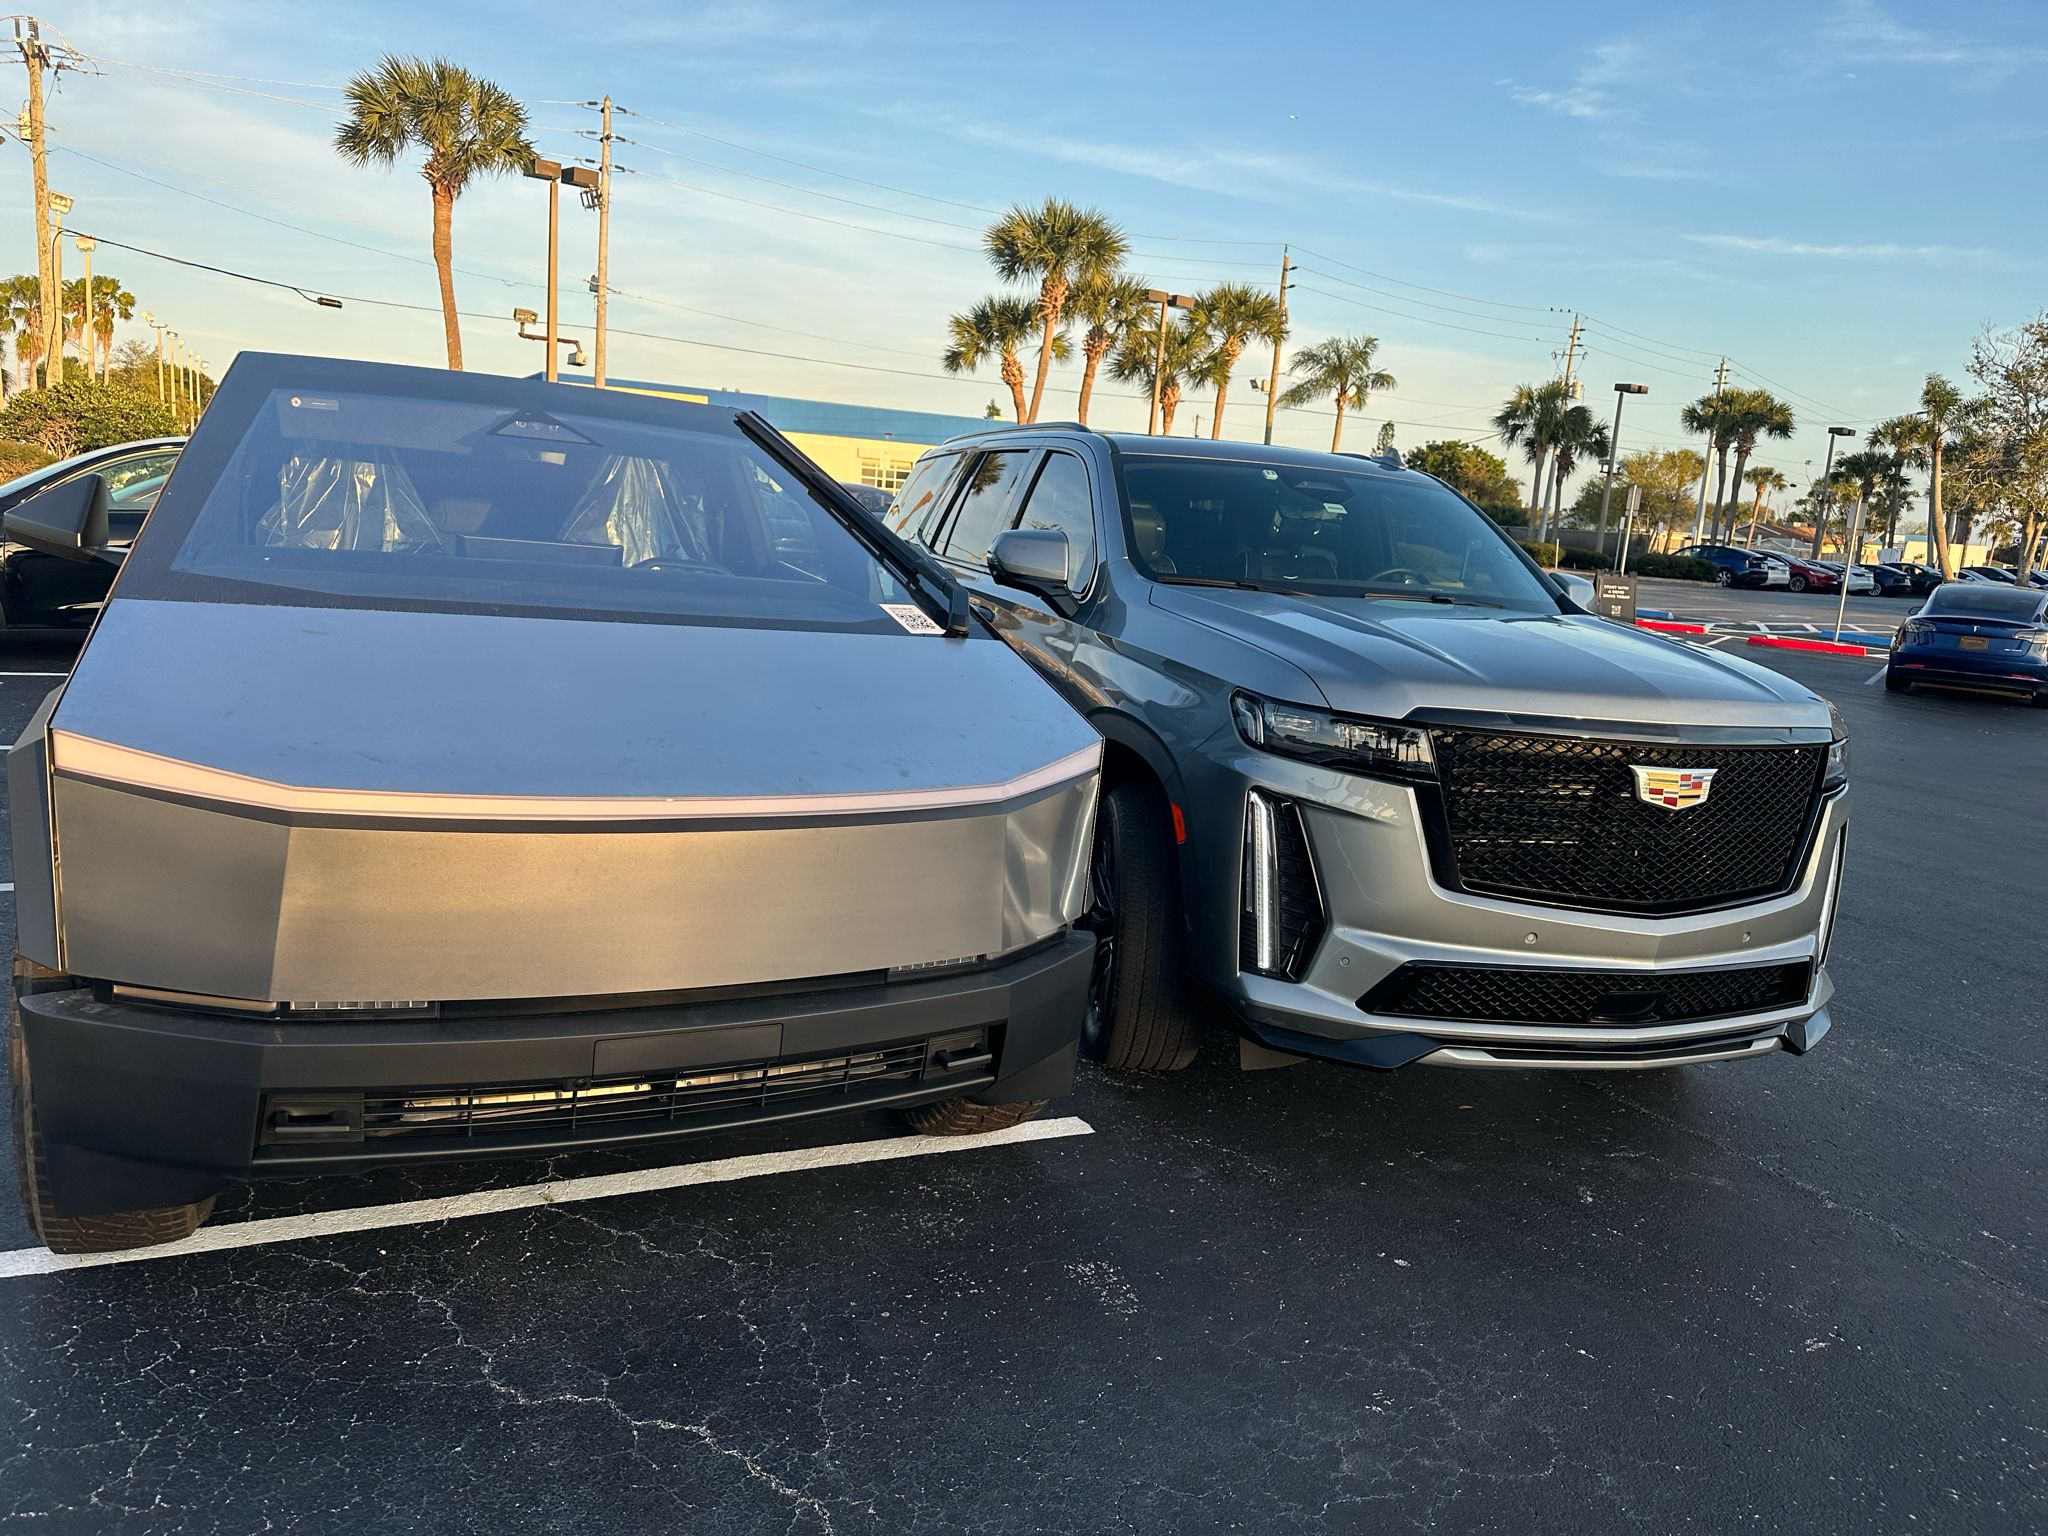 Two modern modes of transportation parked side by side: a silver electric pickup truck on the left and a gray luxury SUV on the right, ready for airport transfer.